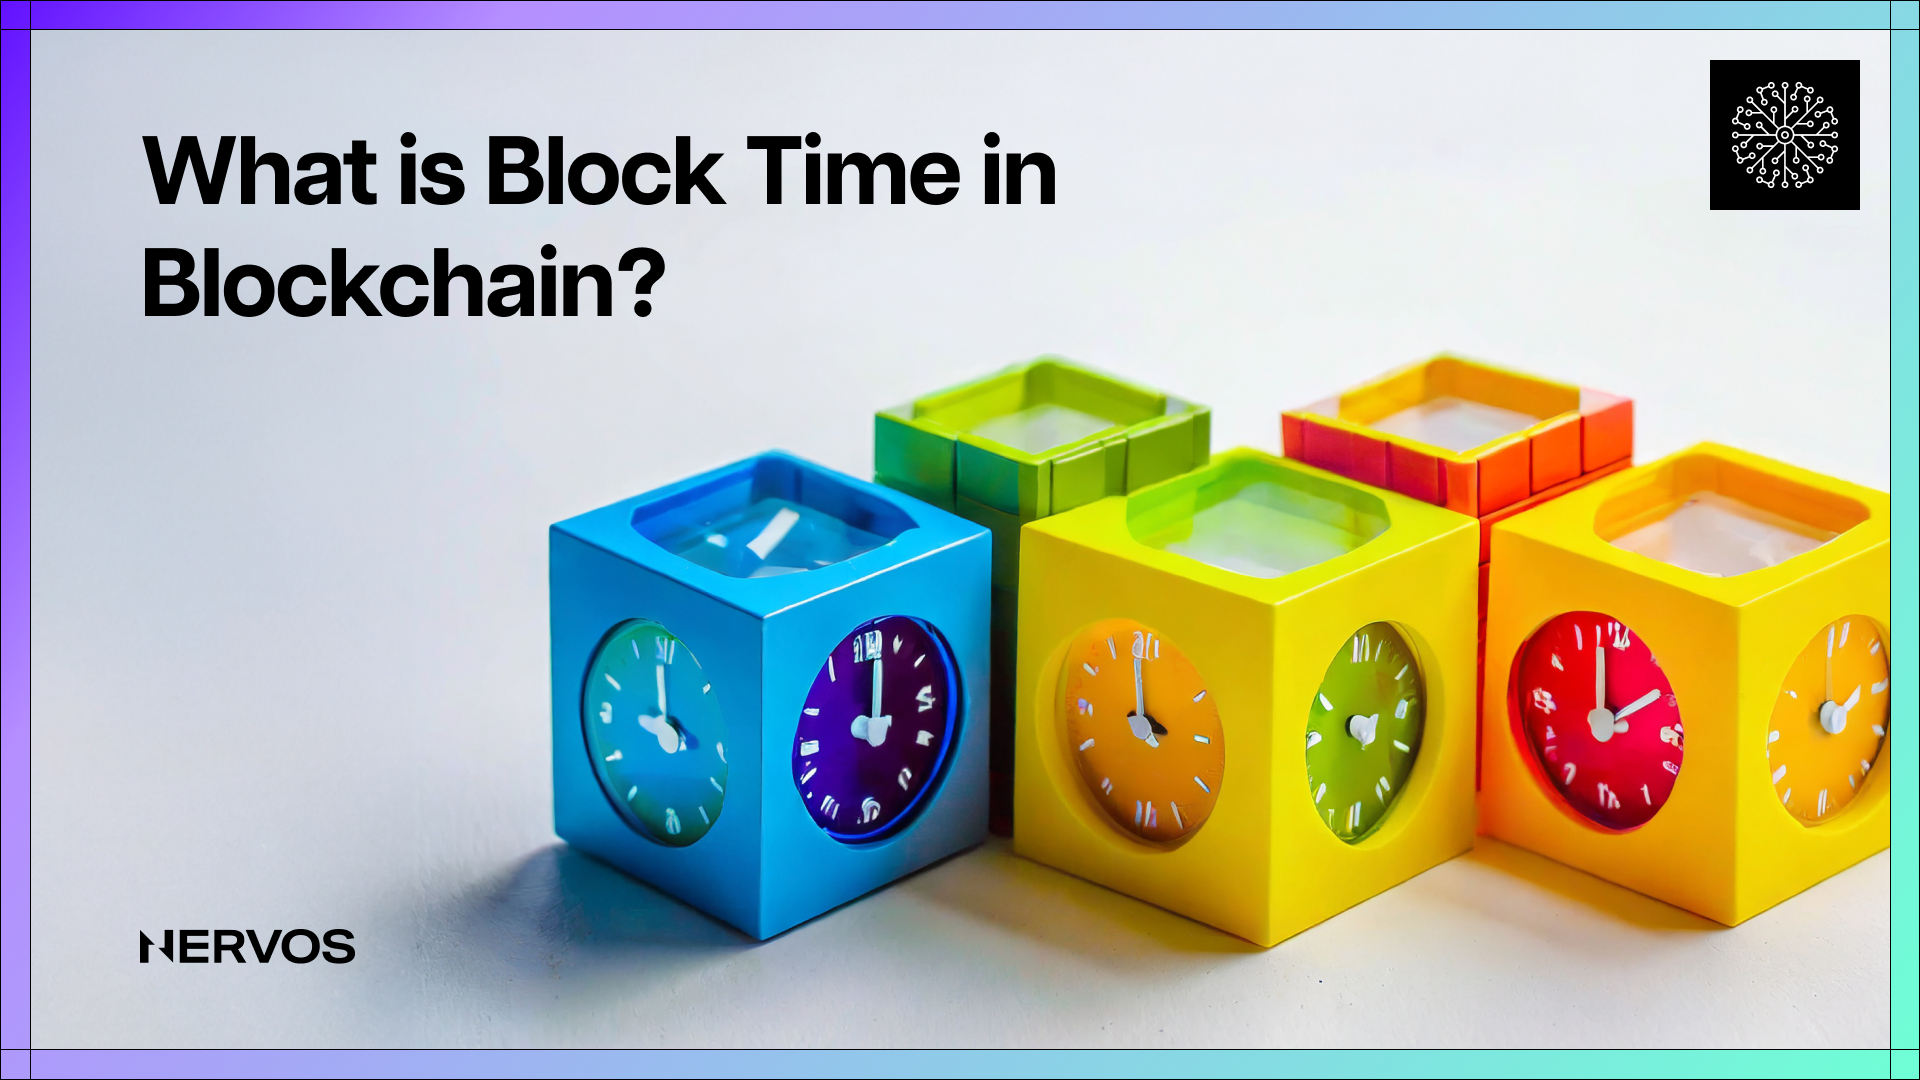 What is Block Time in Blockchain?